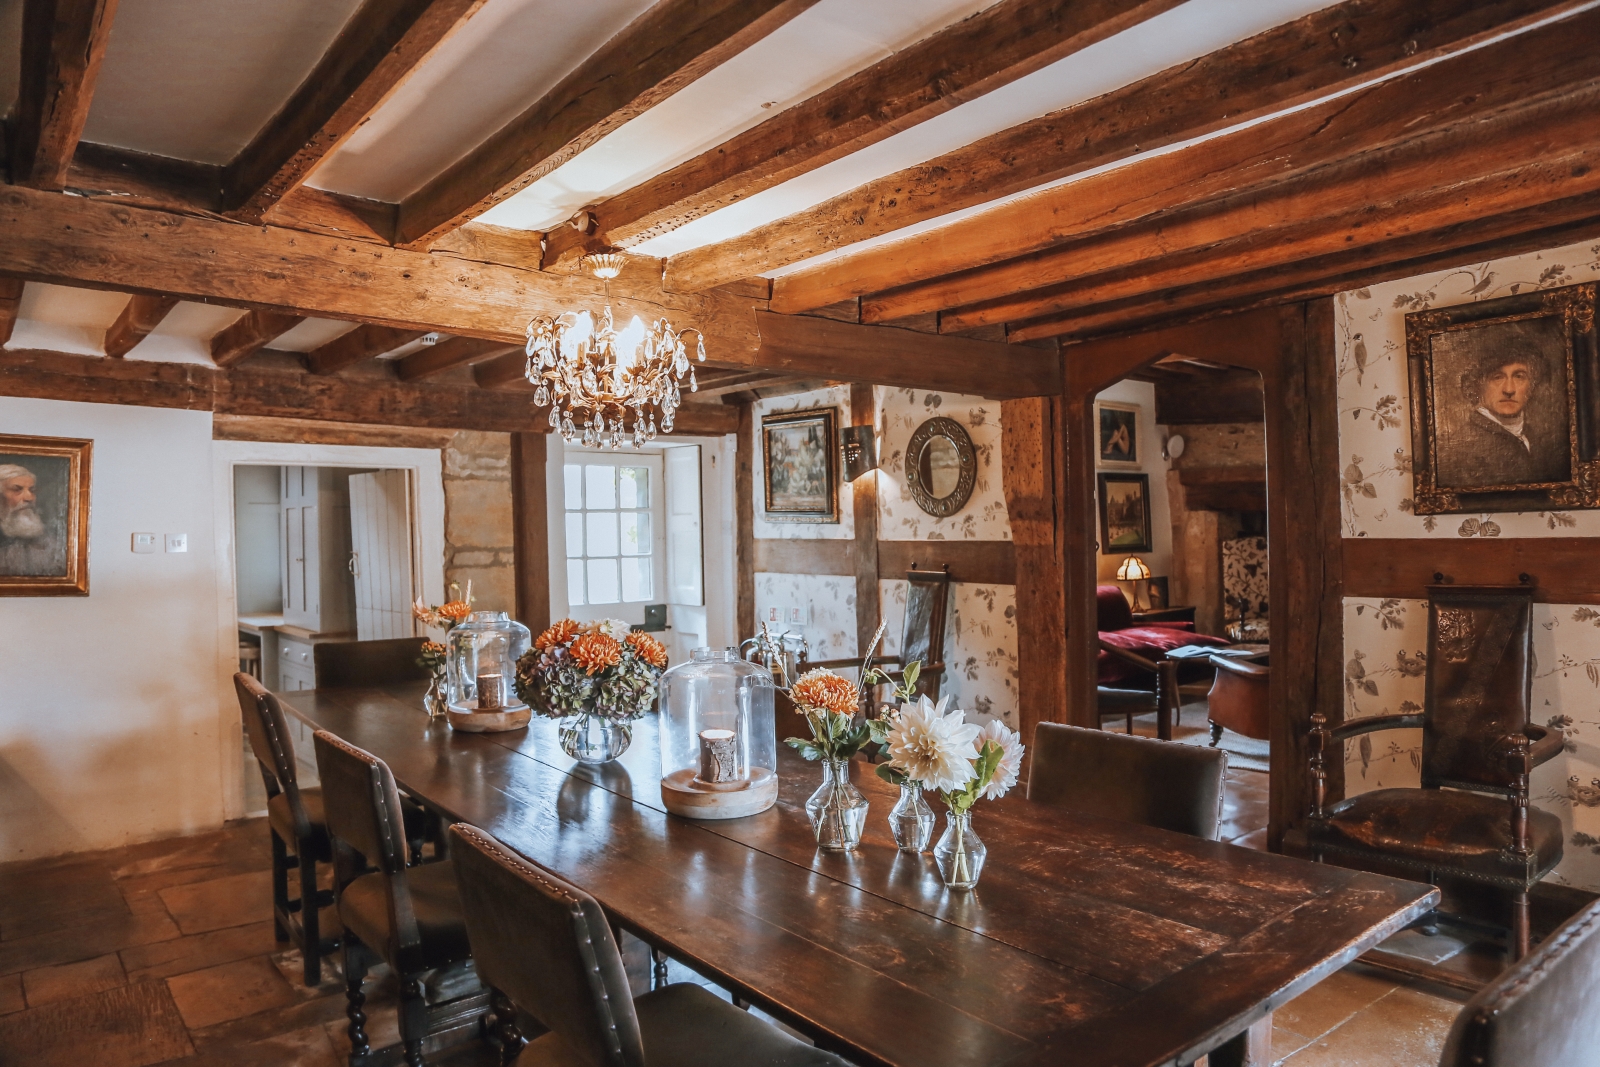 Extensive rustic dining room with exposed wooden beams at Temple Guiting Manor, Cotswolds, England